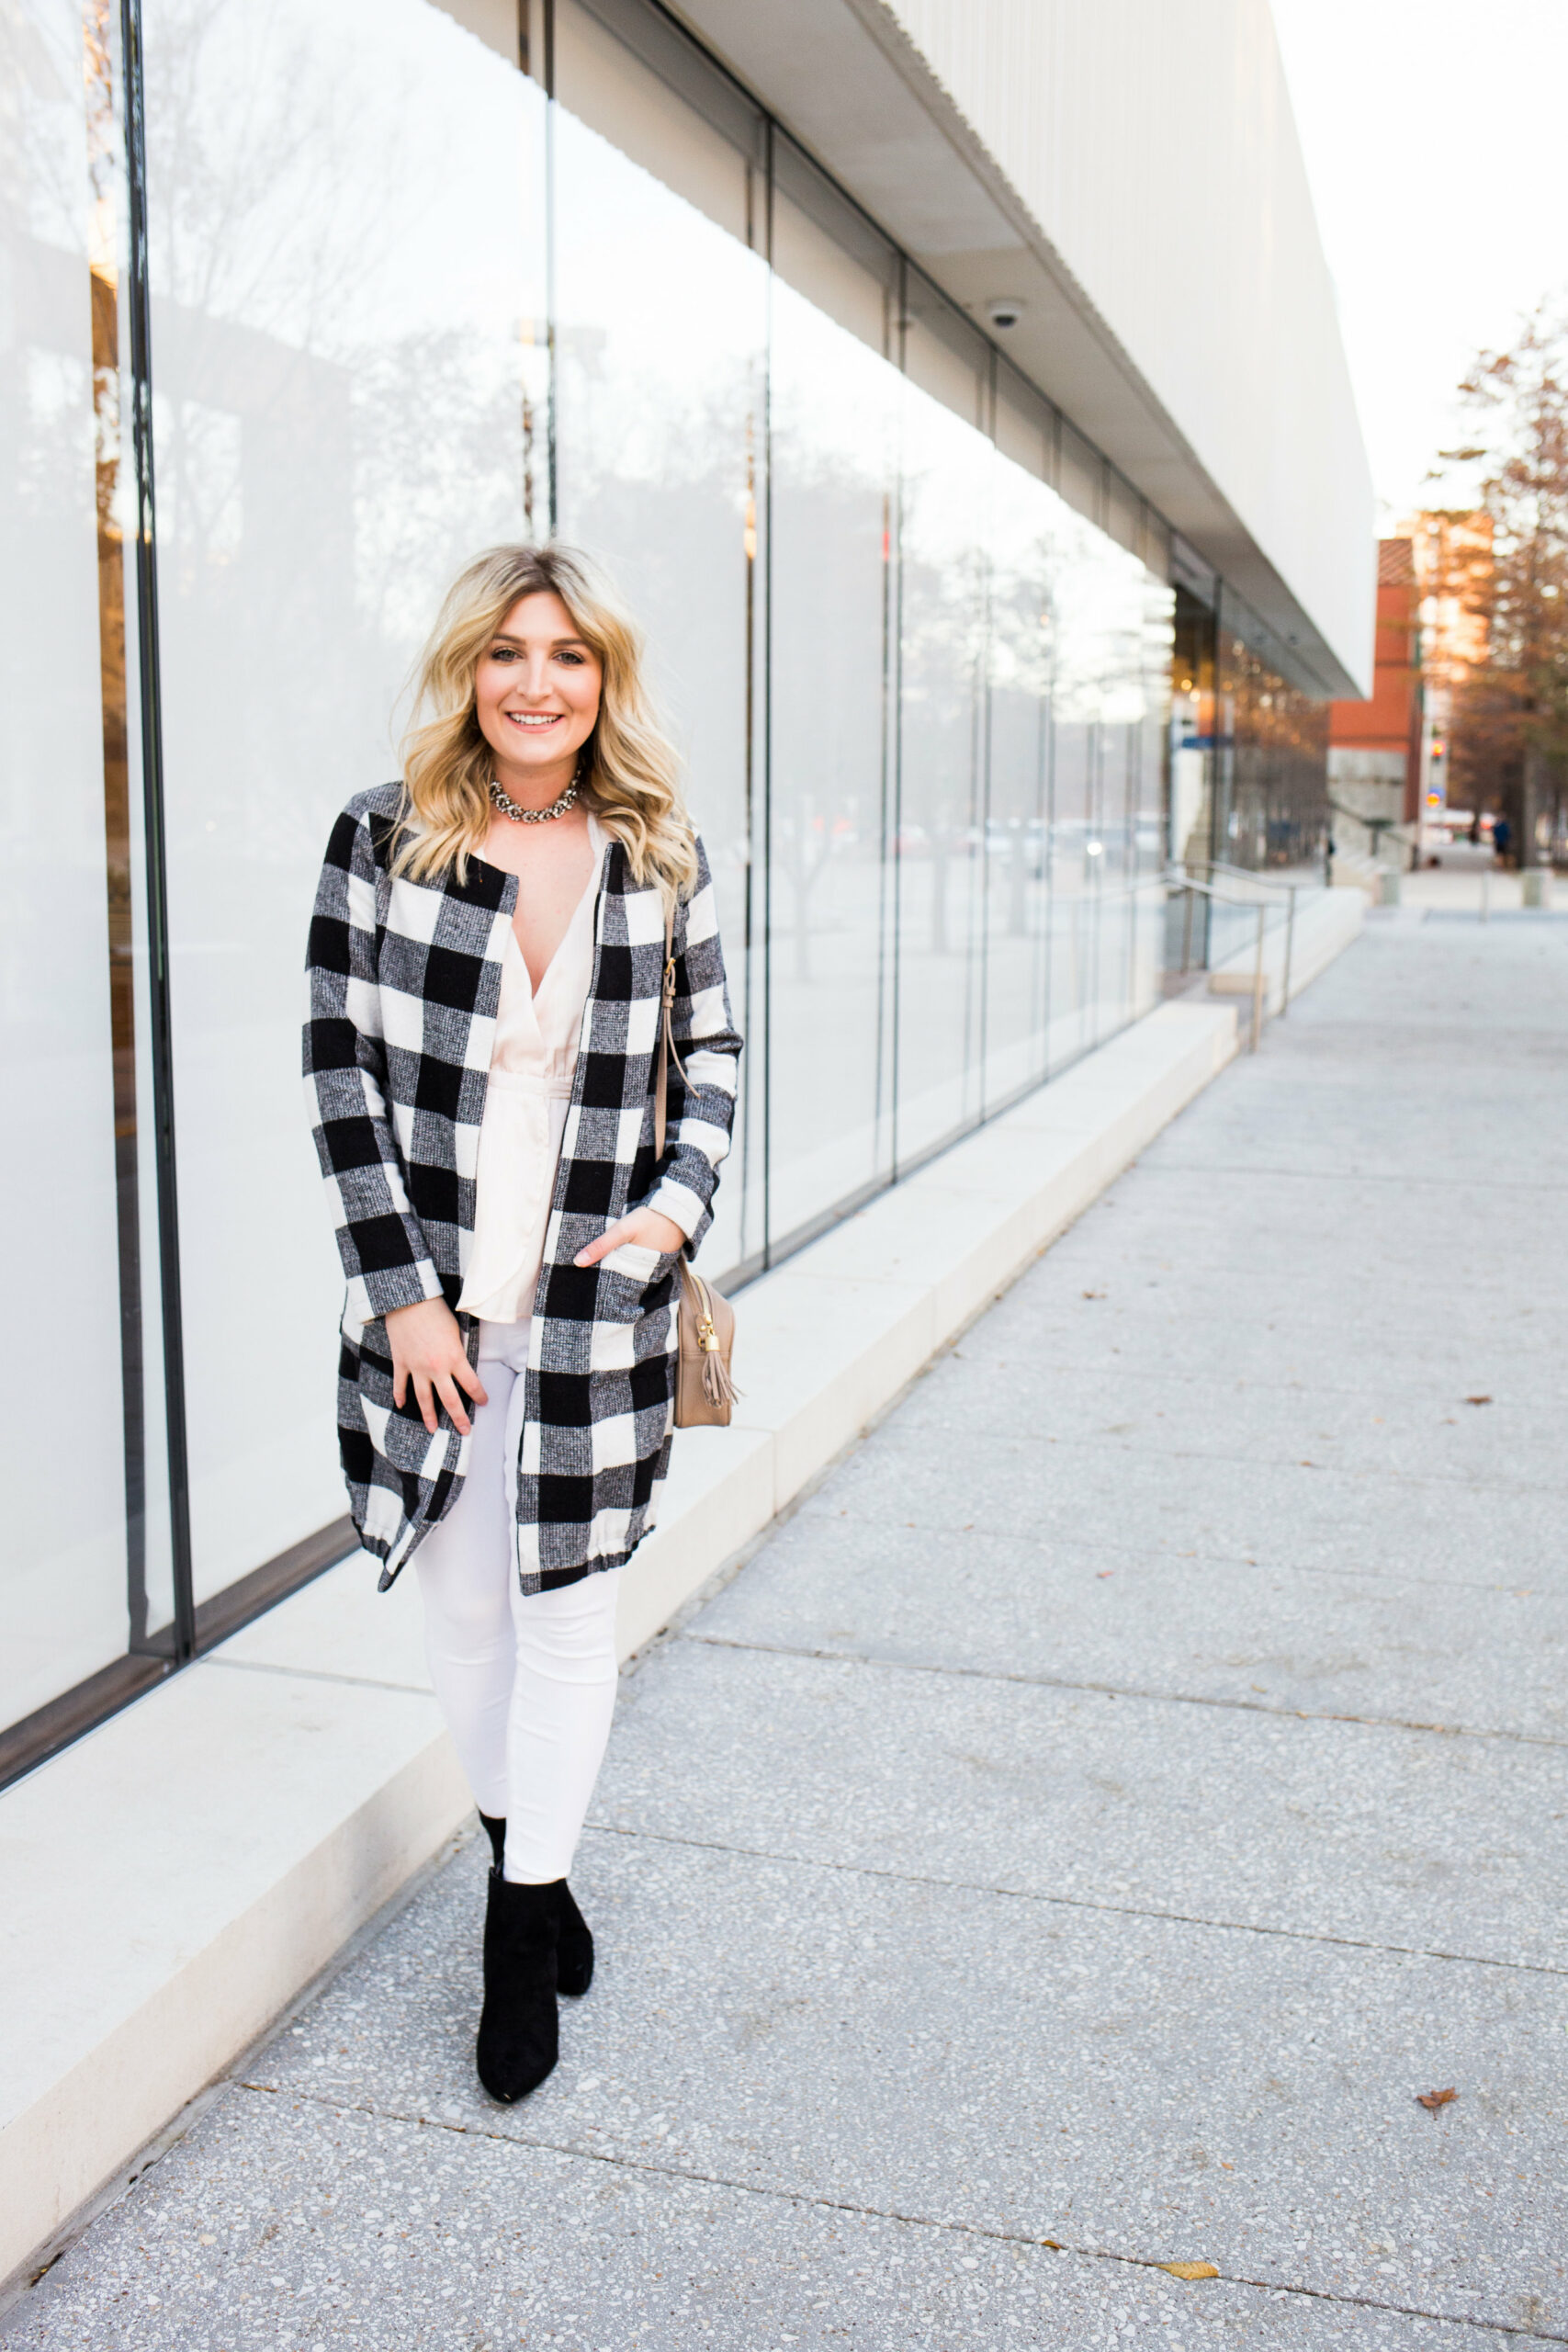 Checkered Winter Coat + Soft Winter Colors